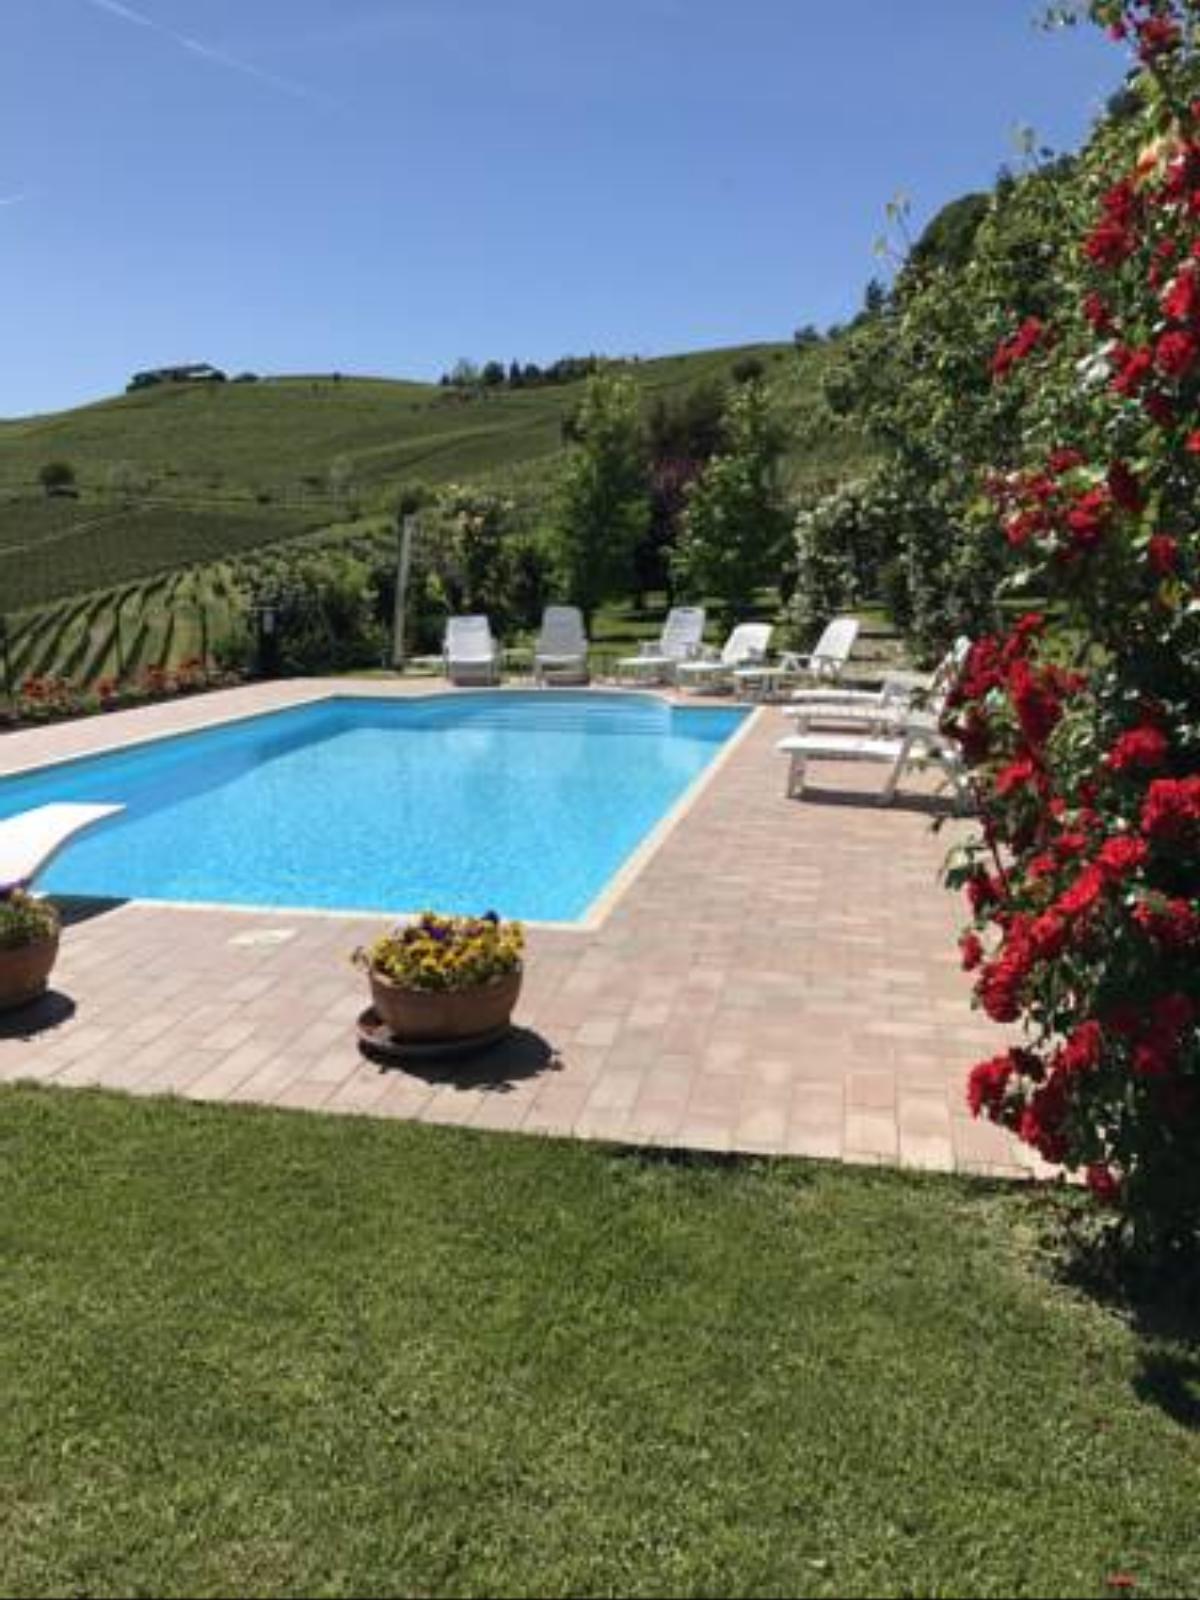 Residence delle Rose Hotel Barolo Italy